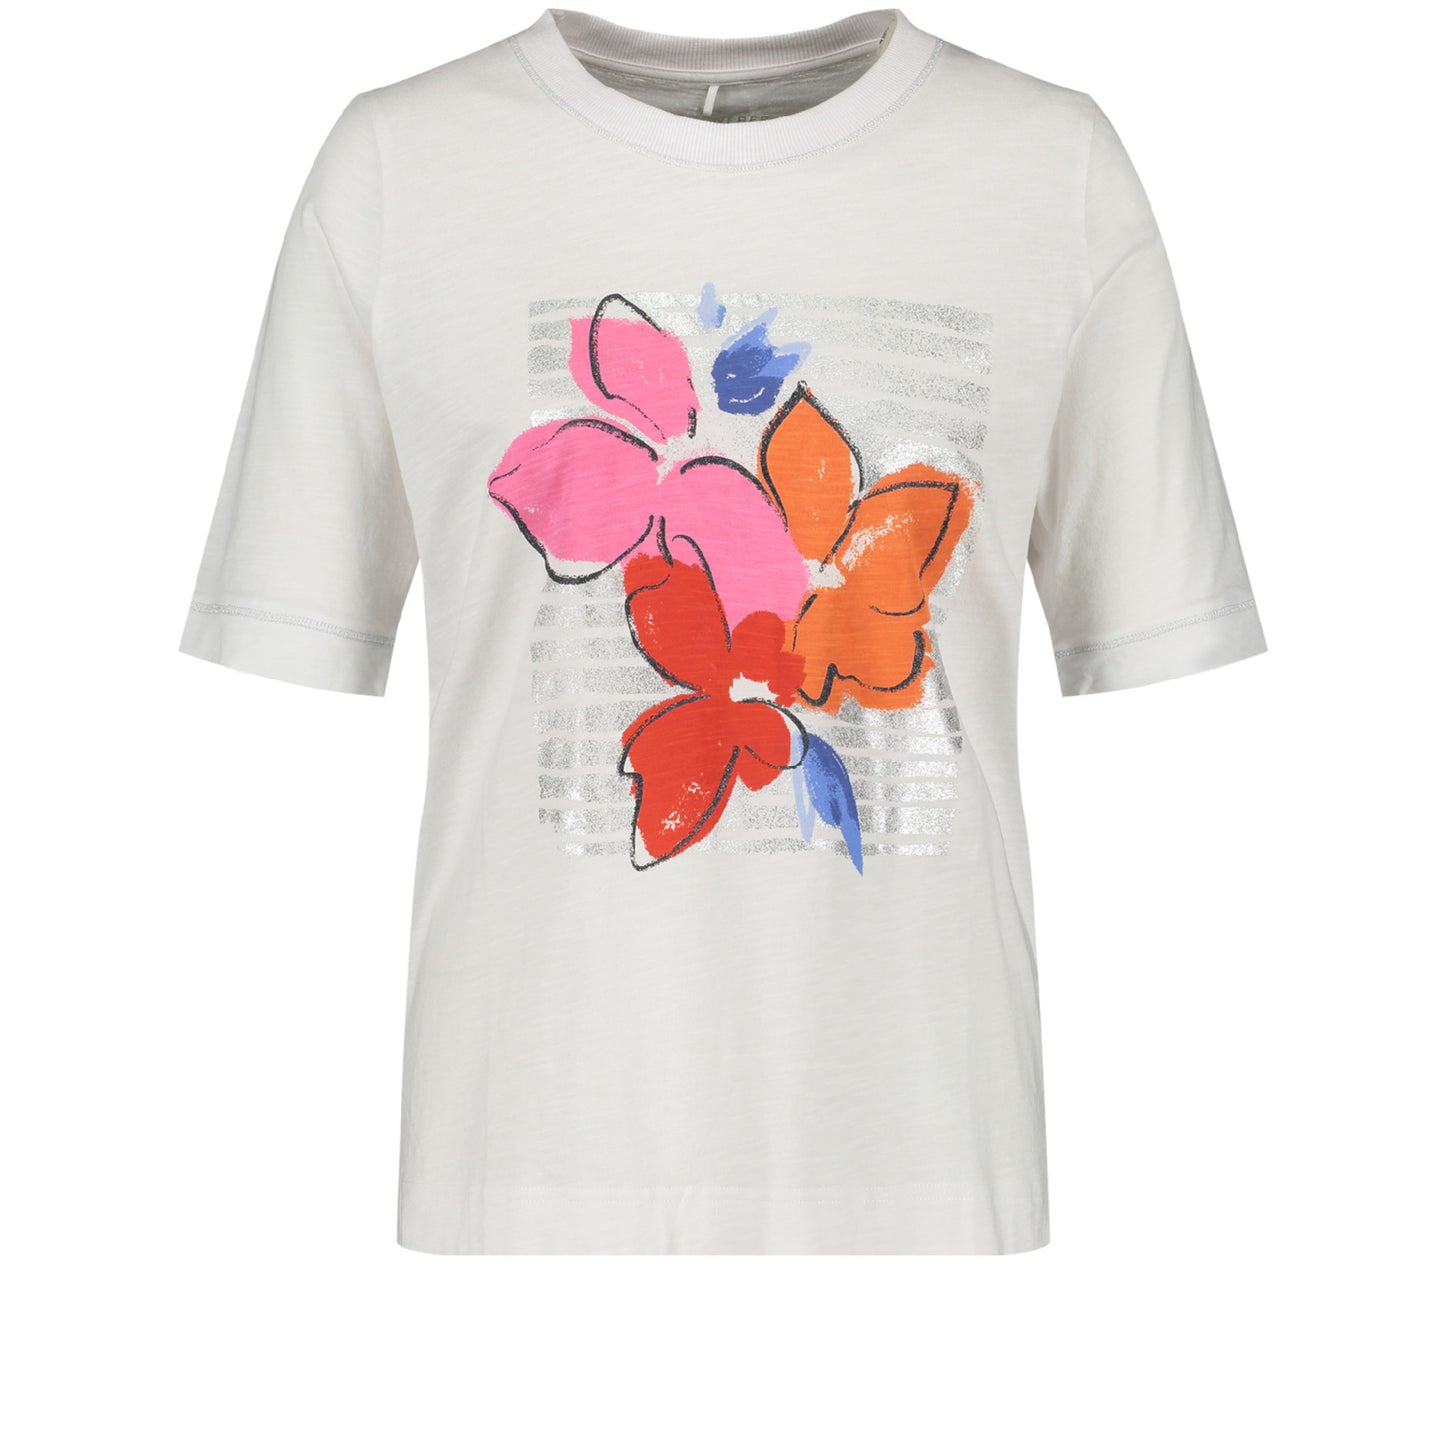 Gerry Weber 870123 44006 99600 Know White T-Shirt